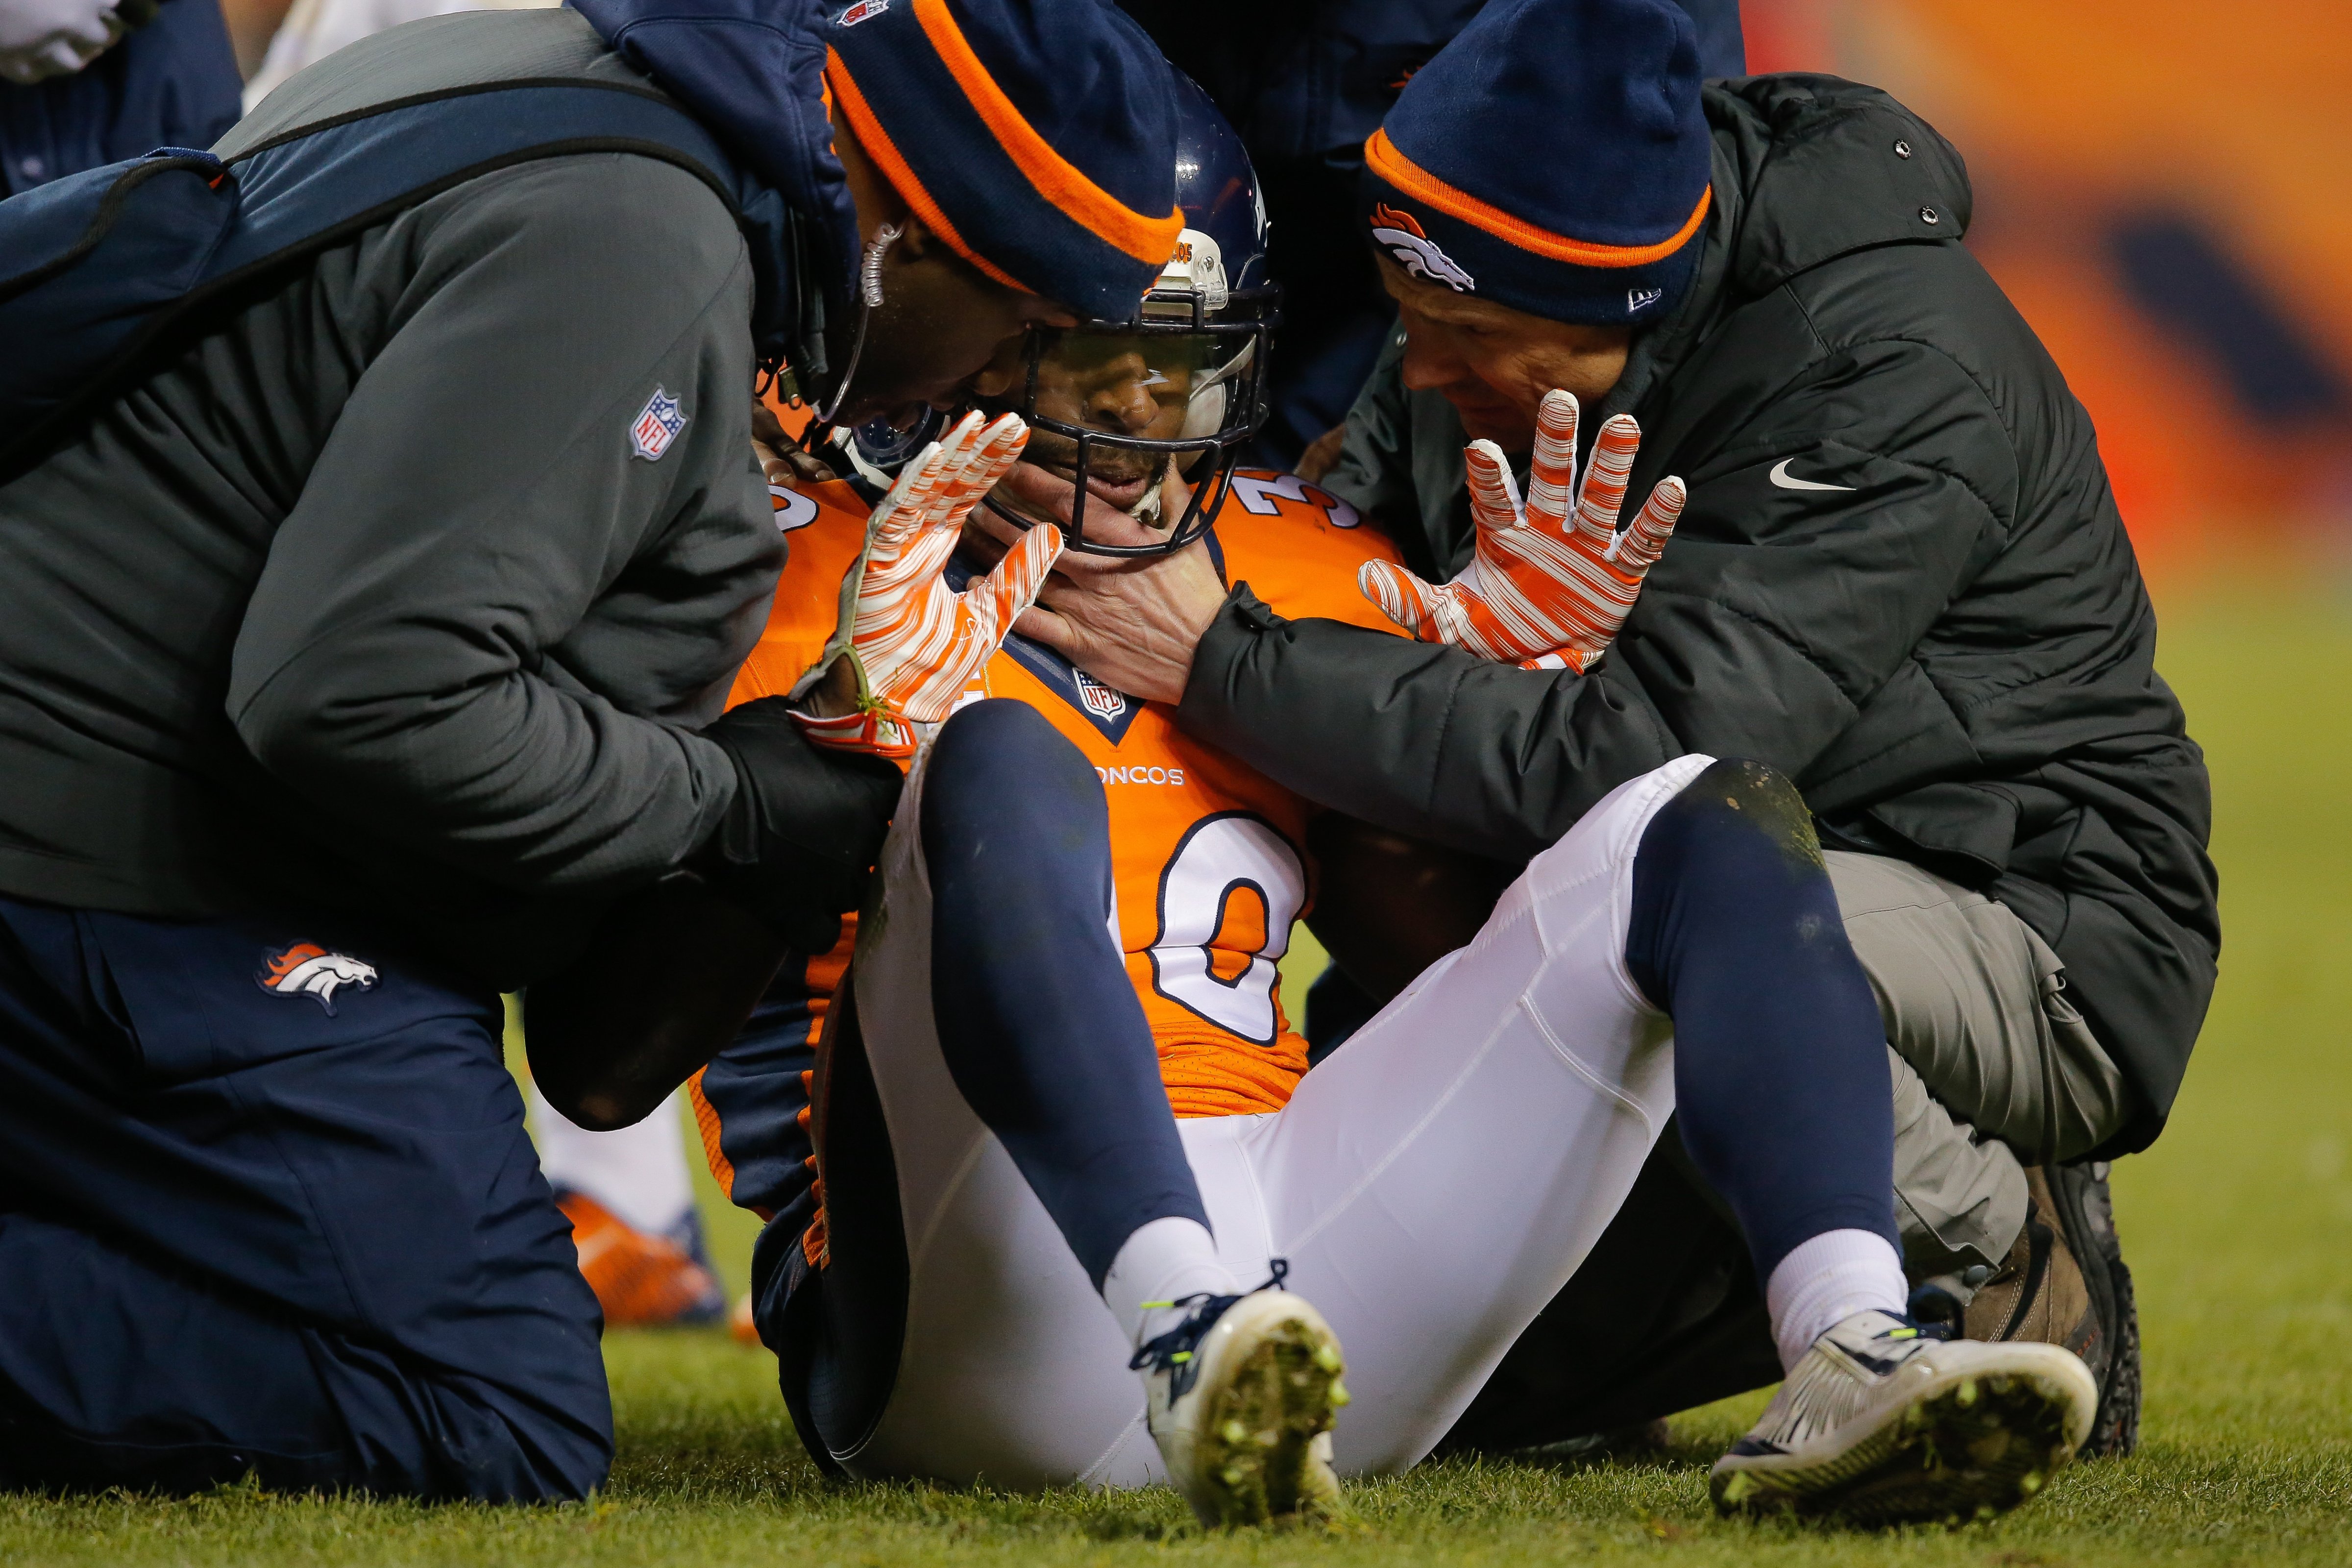 Strong safety David Bruton #30 of the Denver Broncos is attended to by trainers after a play that would force him out of the game with a reported concussion during a game against the Oakland Raiders at Sports Authority Field at Mile High on December 28, 2014 in Denver, Colorado. (Doug Pensinger/Getty Images)